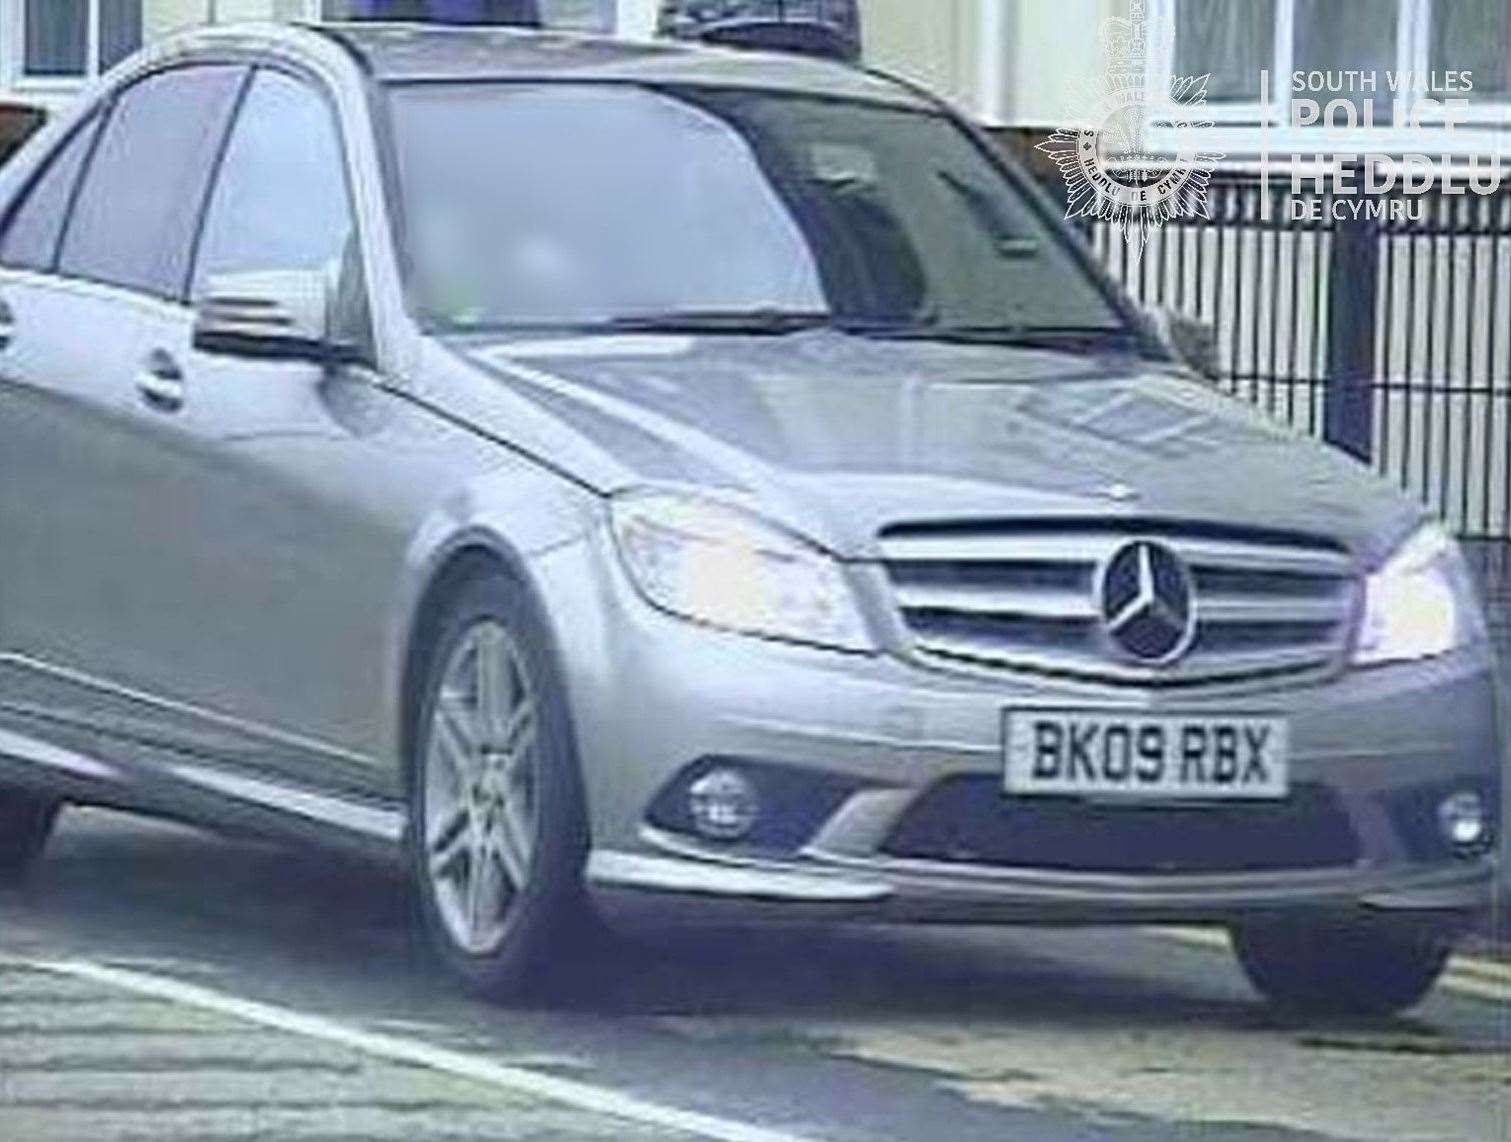 A silver/grey Mercedes C200 Sport, registration BK09 RBX, which police are trying to trace (South Wales Police/PA)